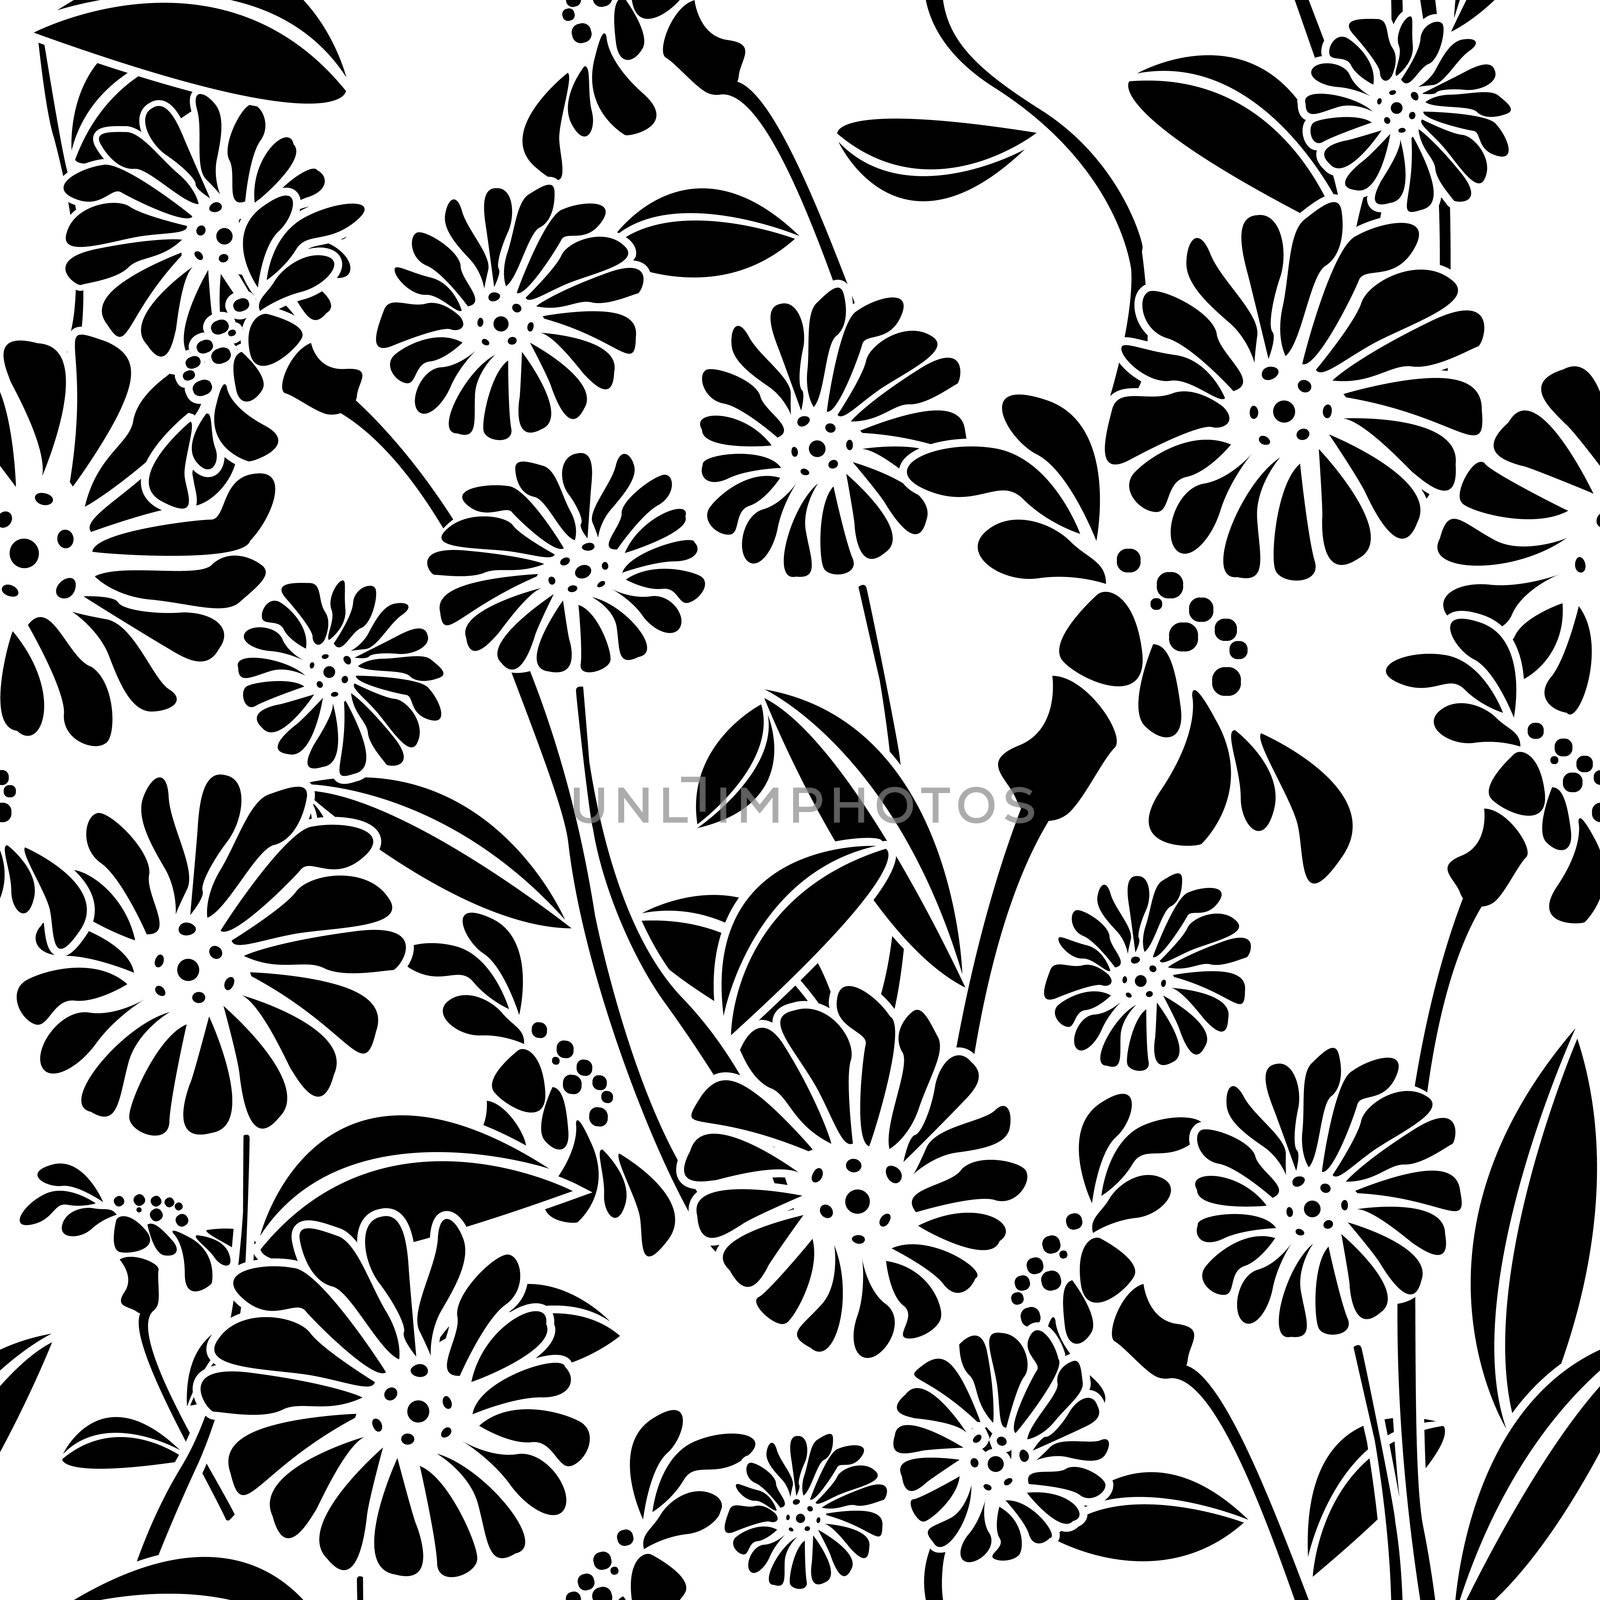 Decorative floral background, seamless pattern in black and white, clip art